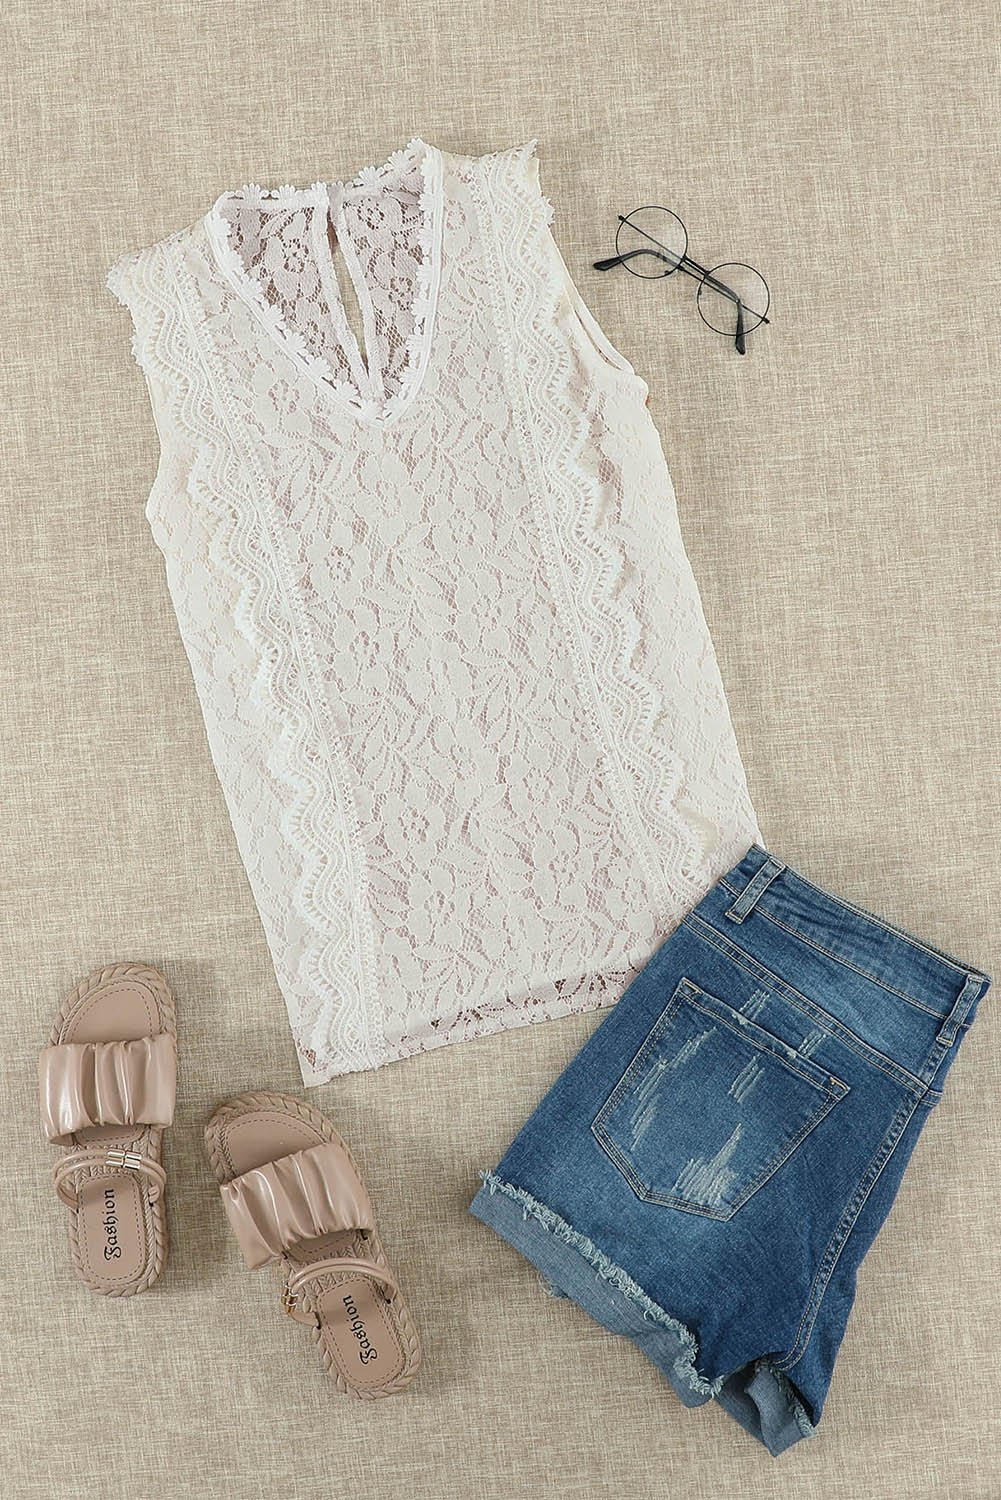 V Neck Sleeveless Lace Top for Summer